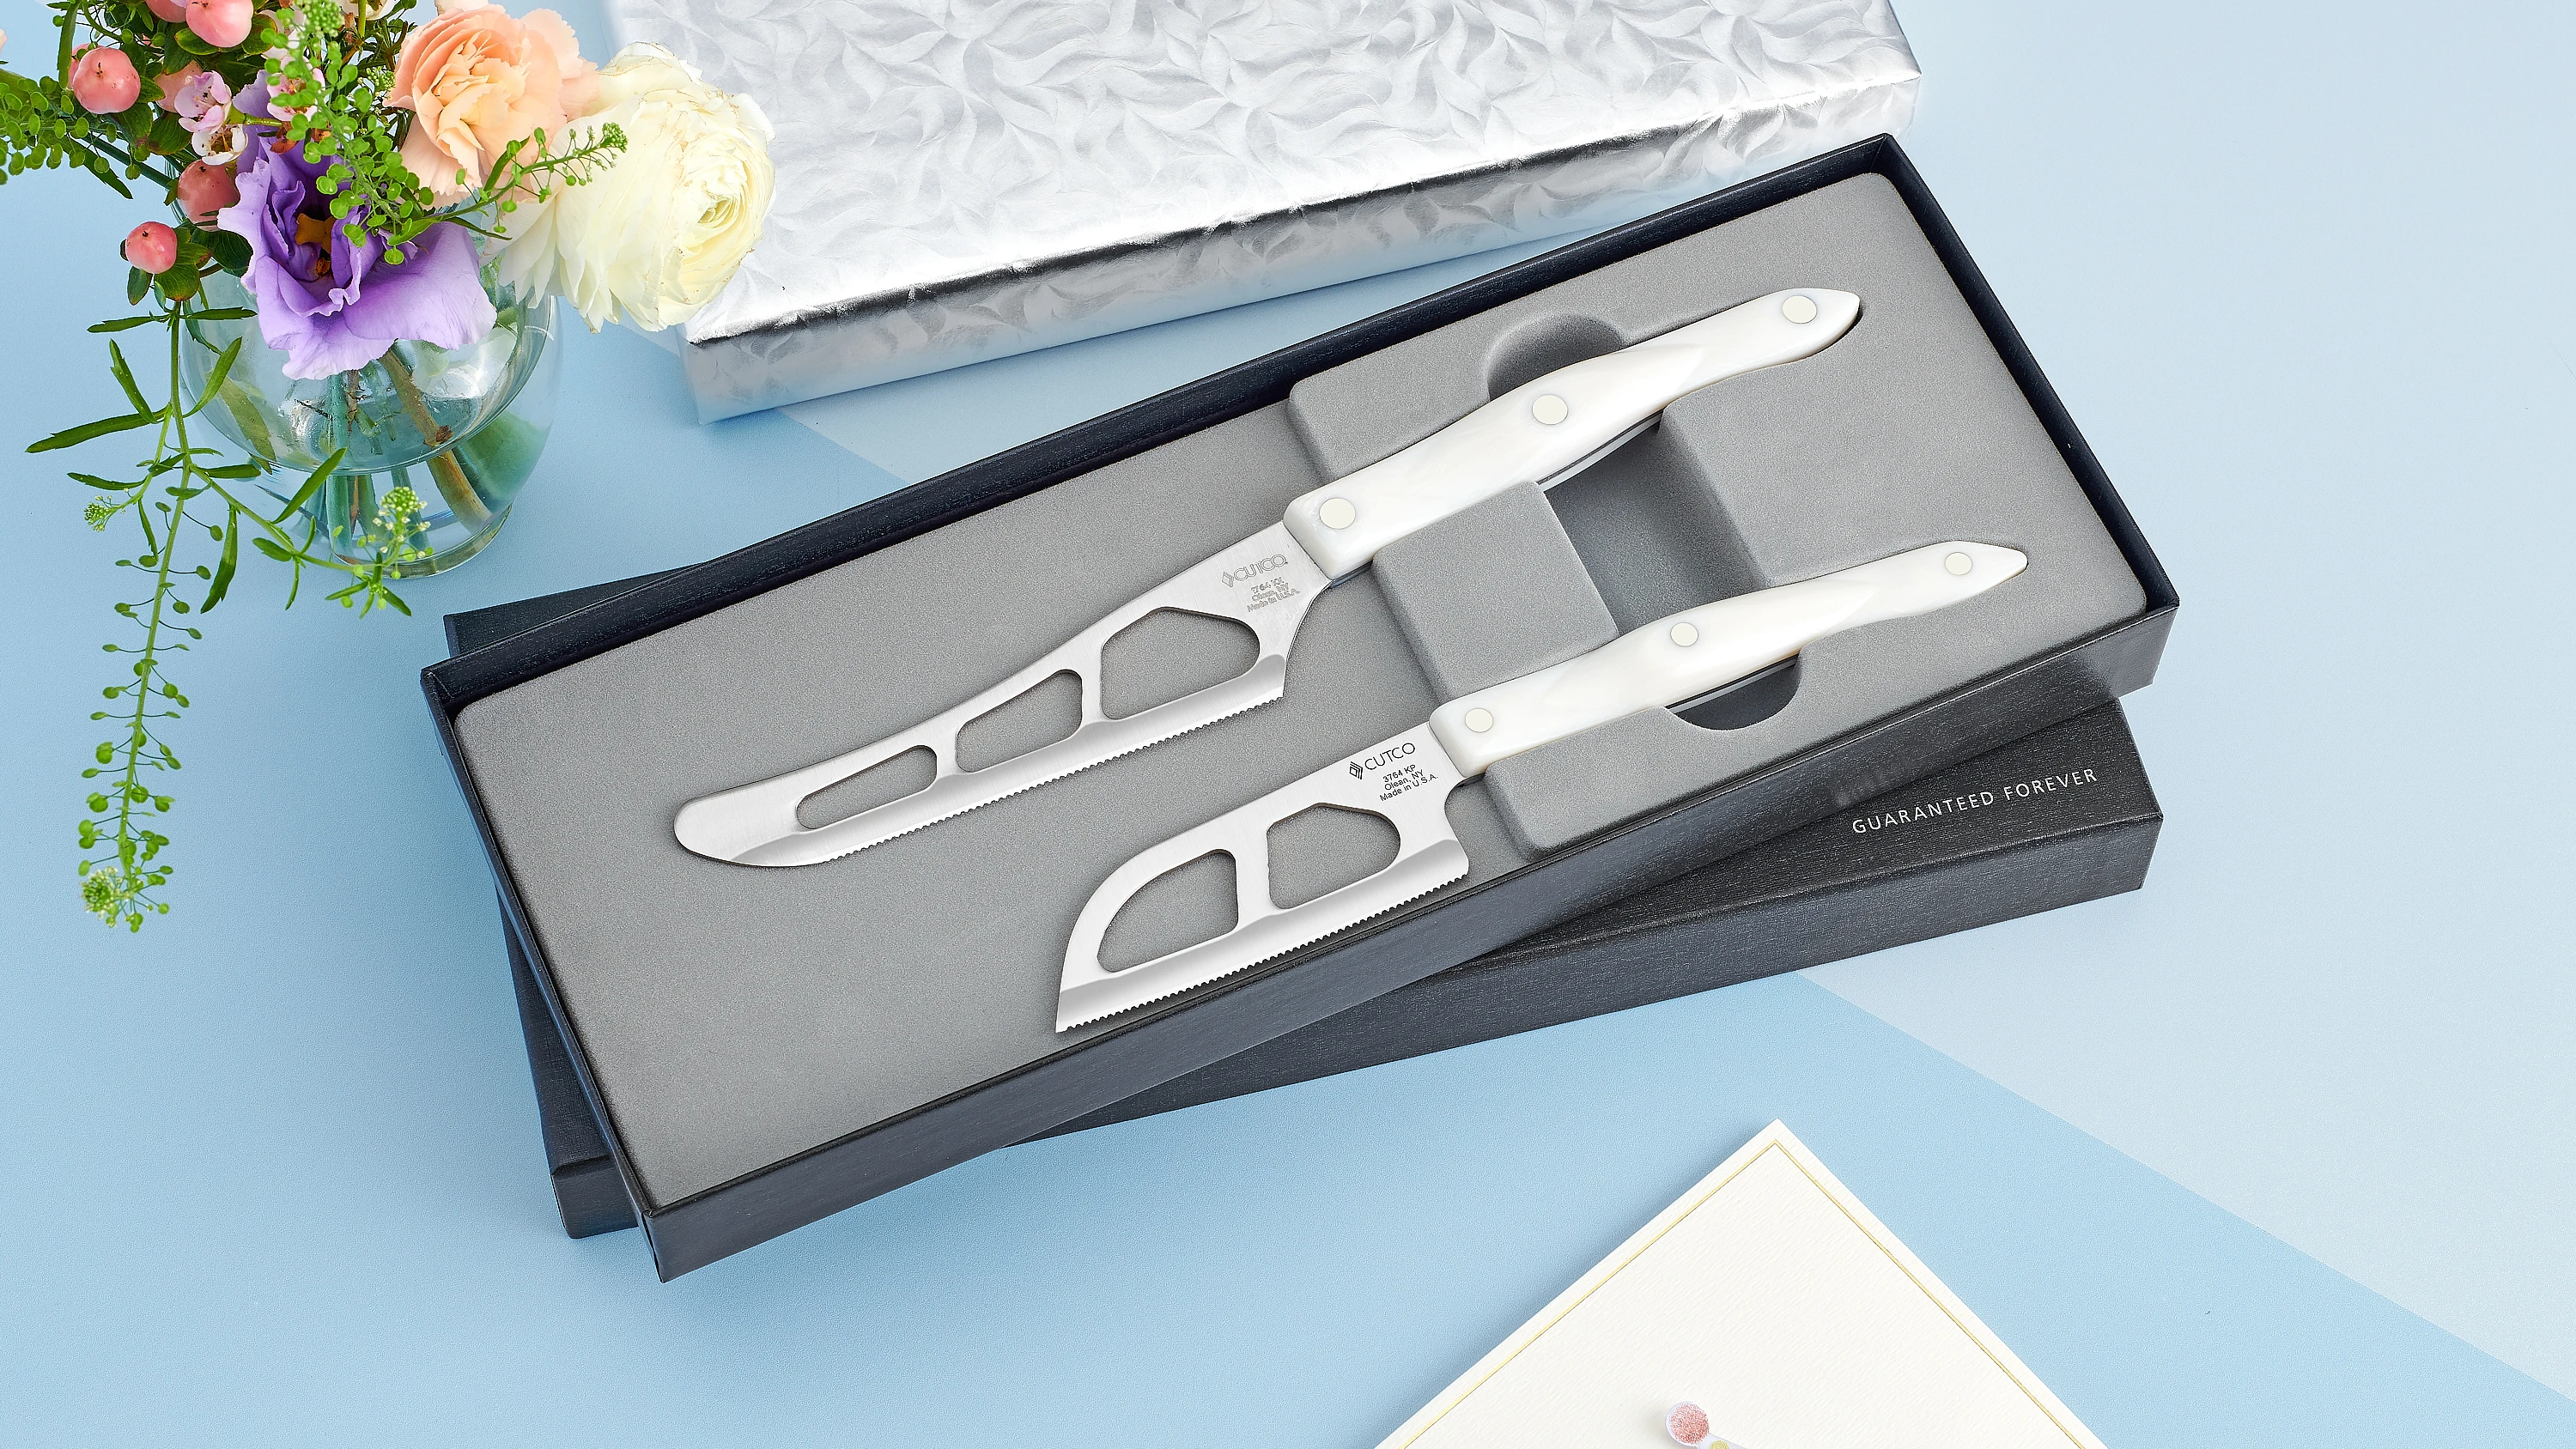 Carver's Choice | 2 Pieces | Gift-Boxed Knife Sets by Cutco